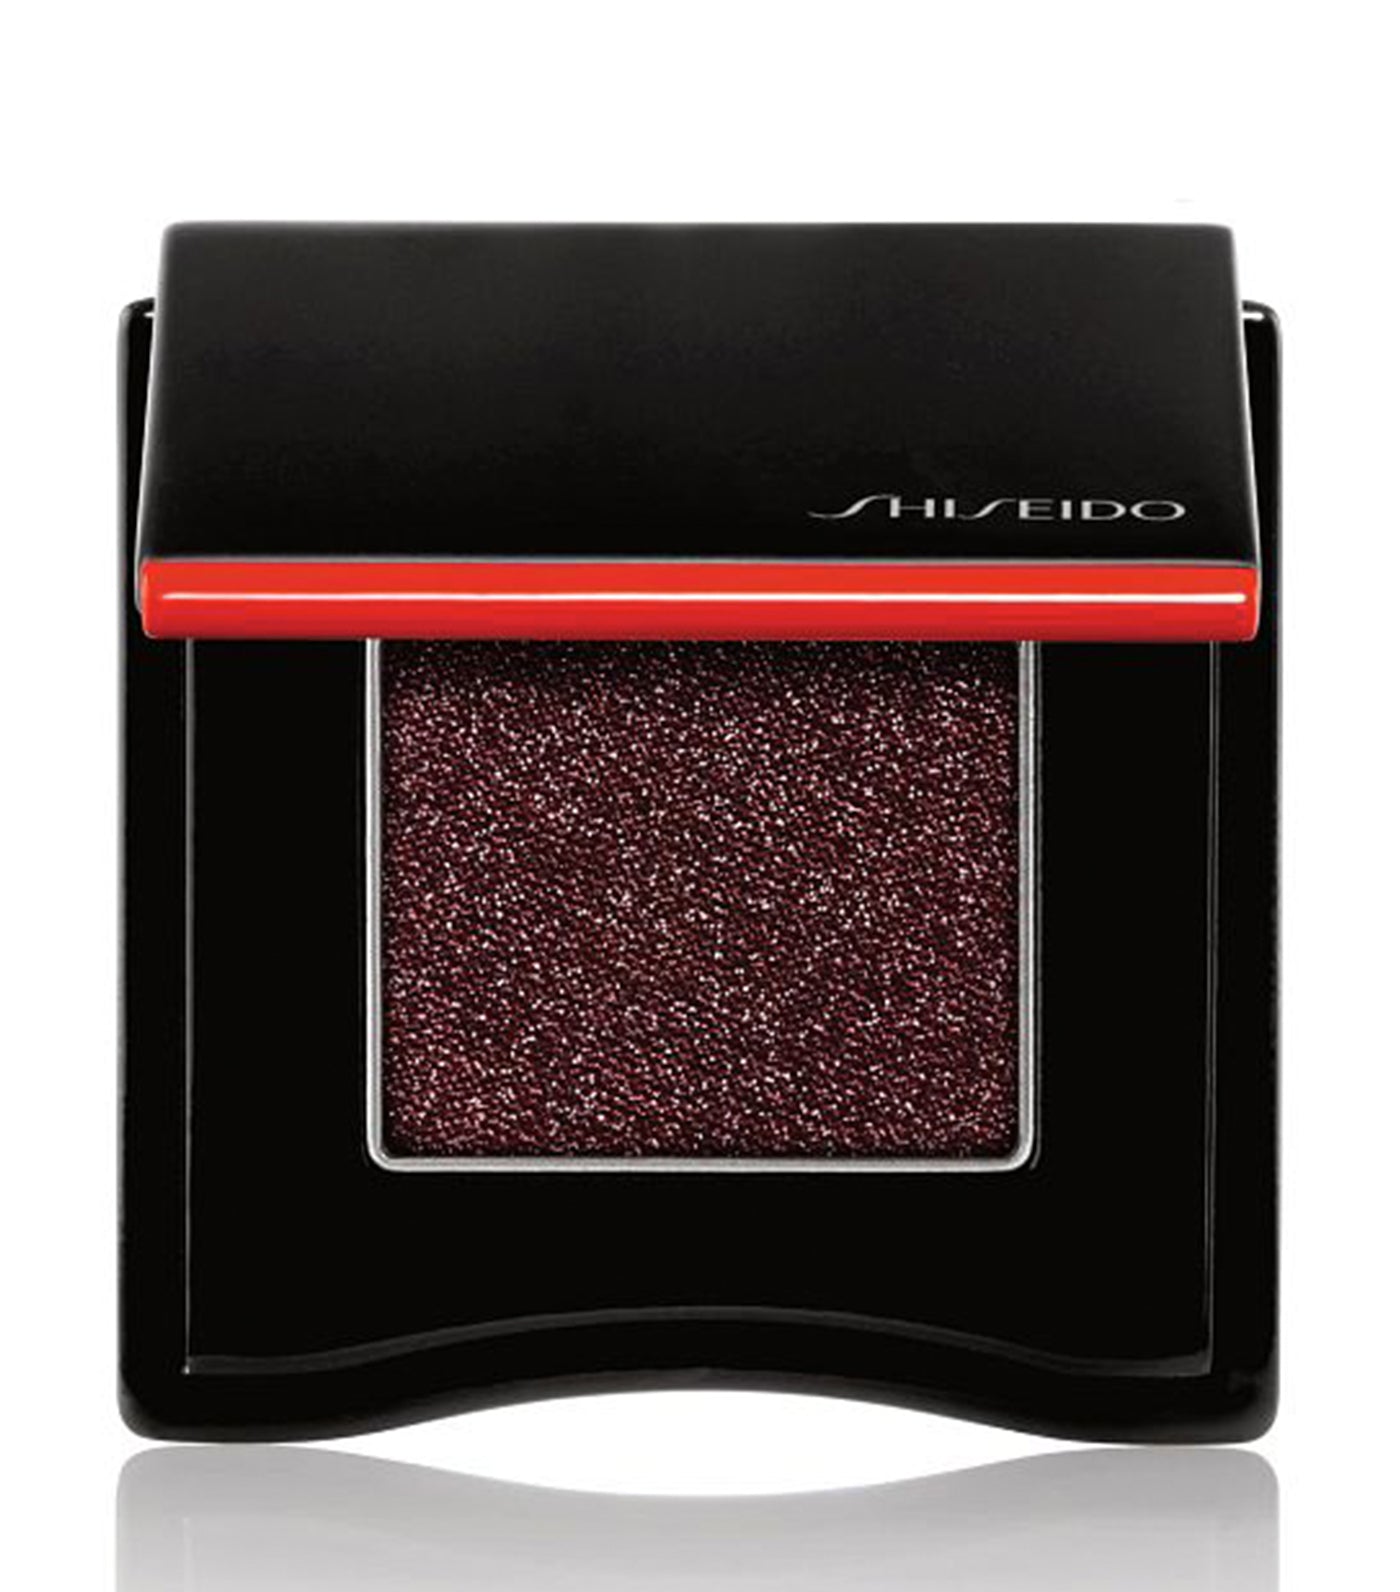 SHISEIDO - Beli 1 GRATIS 1: Shiseido Shimmer Gel Gloss (4 Hours Left).   Shine, reimagined in a highly reflective shimmer  gloss with a mirror-like crystalline finish. Up to 12-hour hydration with